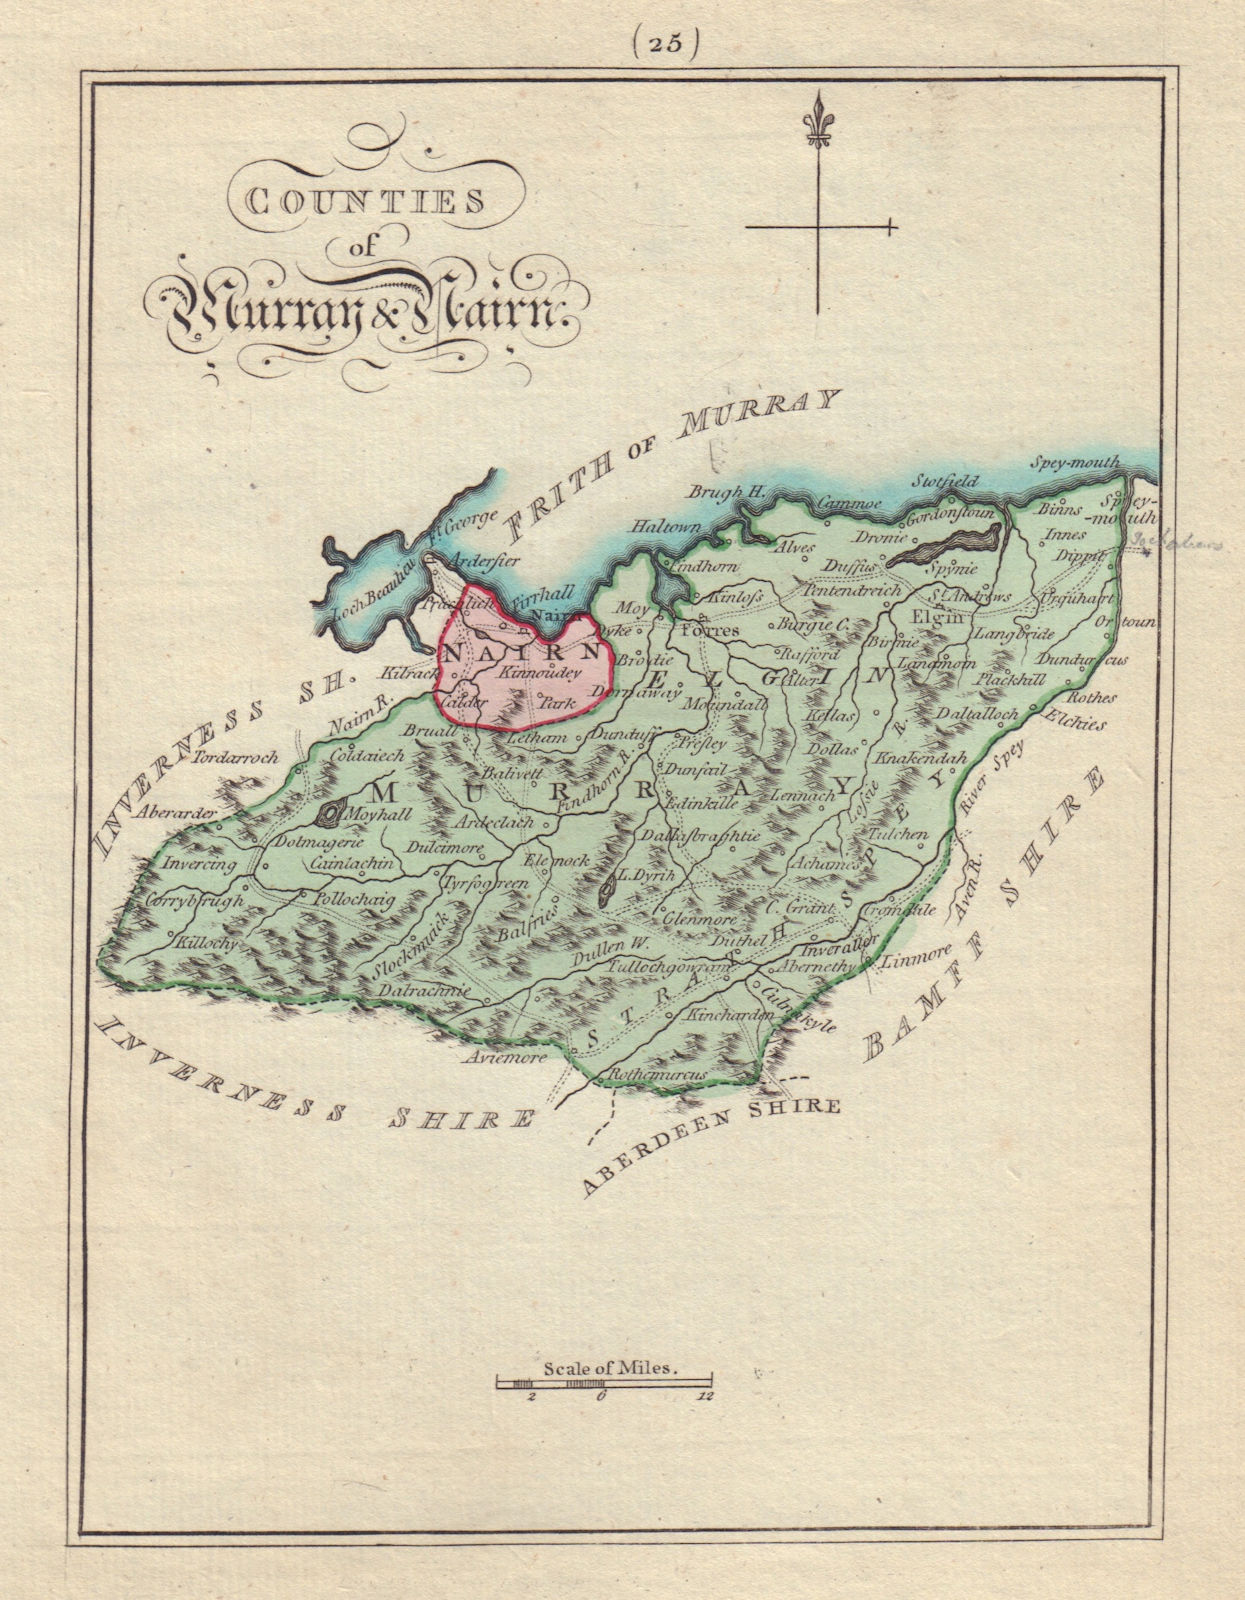 Associate Product Counties of Murray and Nairn. Moray and Nairnshire. SAYER / ARMSTRONG 1794 map